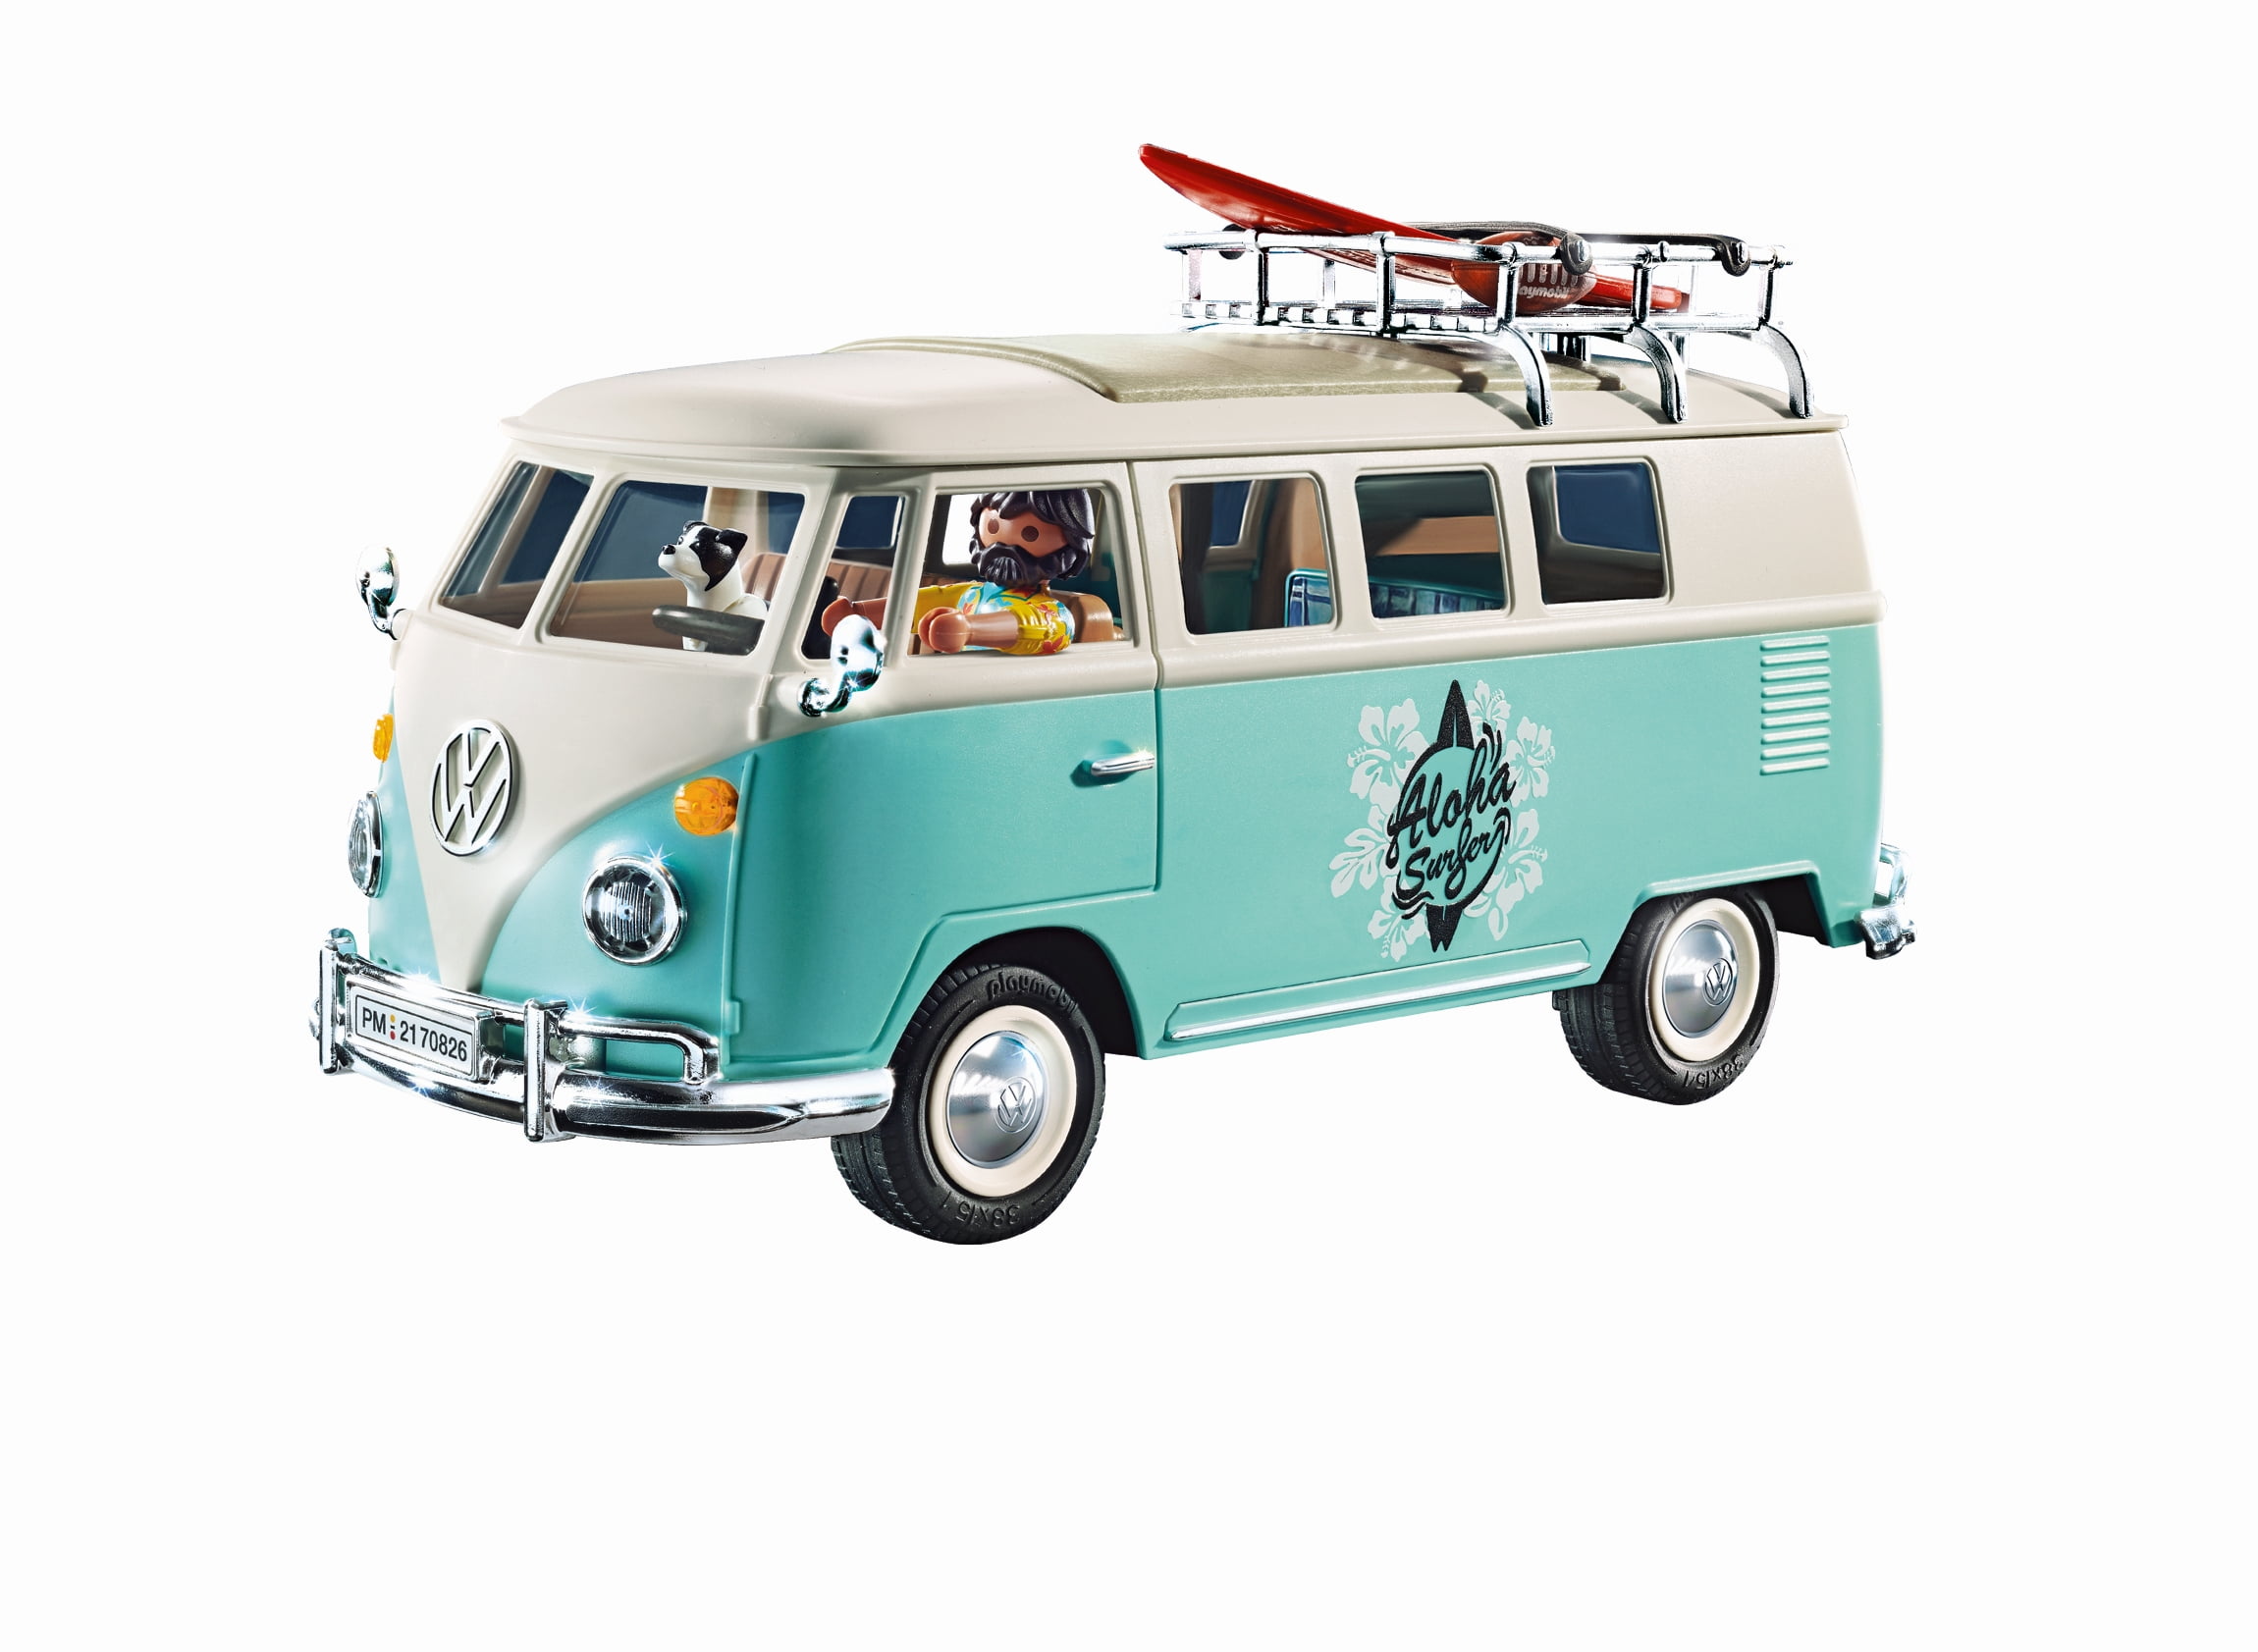 Camp In Style With The Playmobil Volkswagen Camping Bus - Playroom  Chronicles